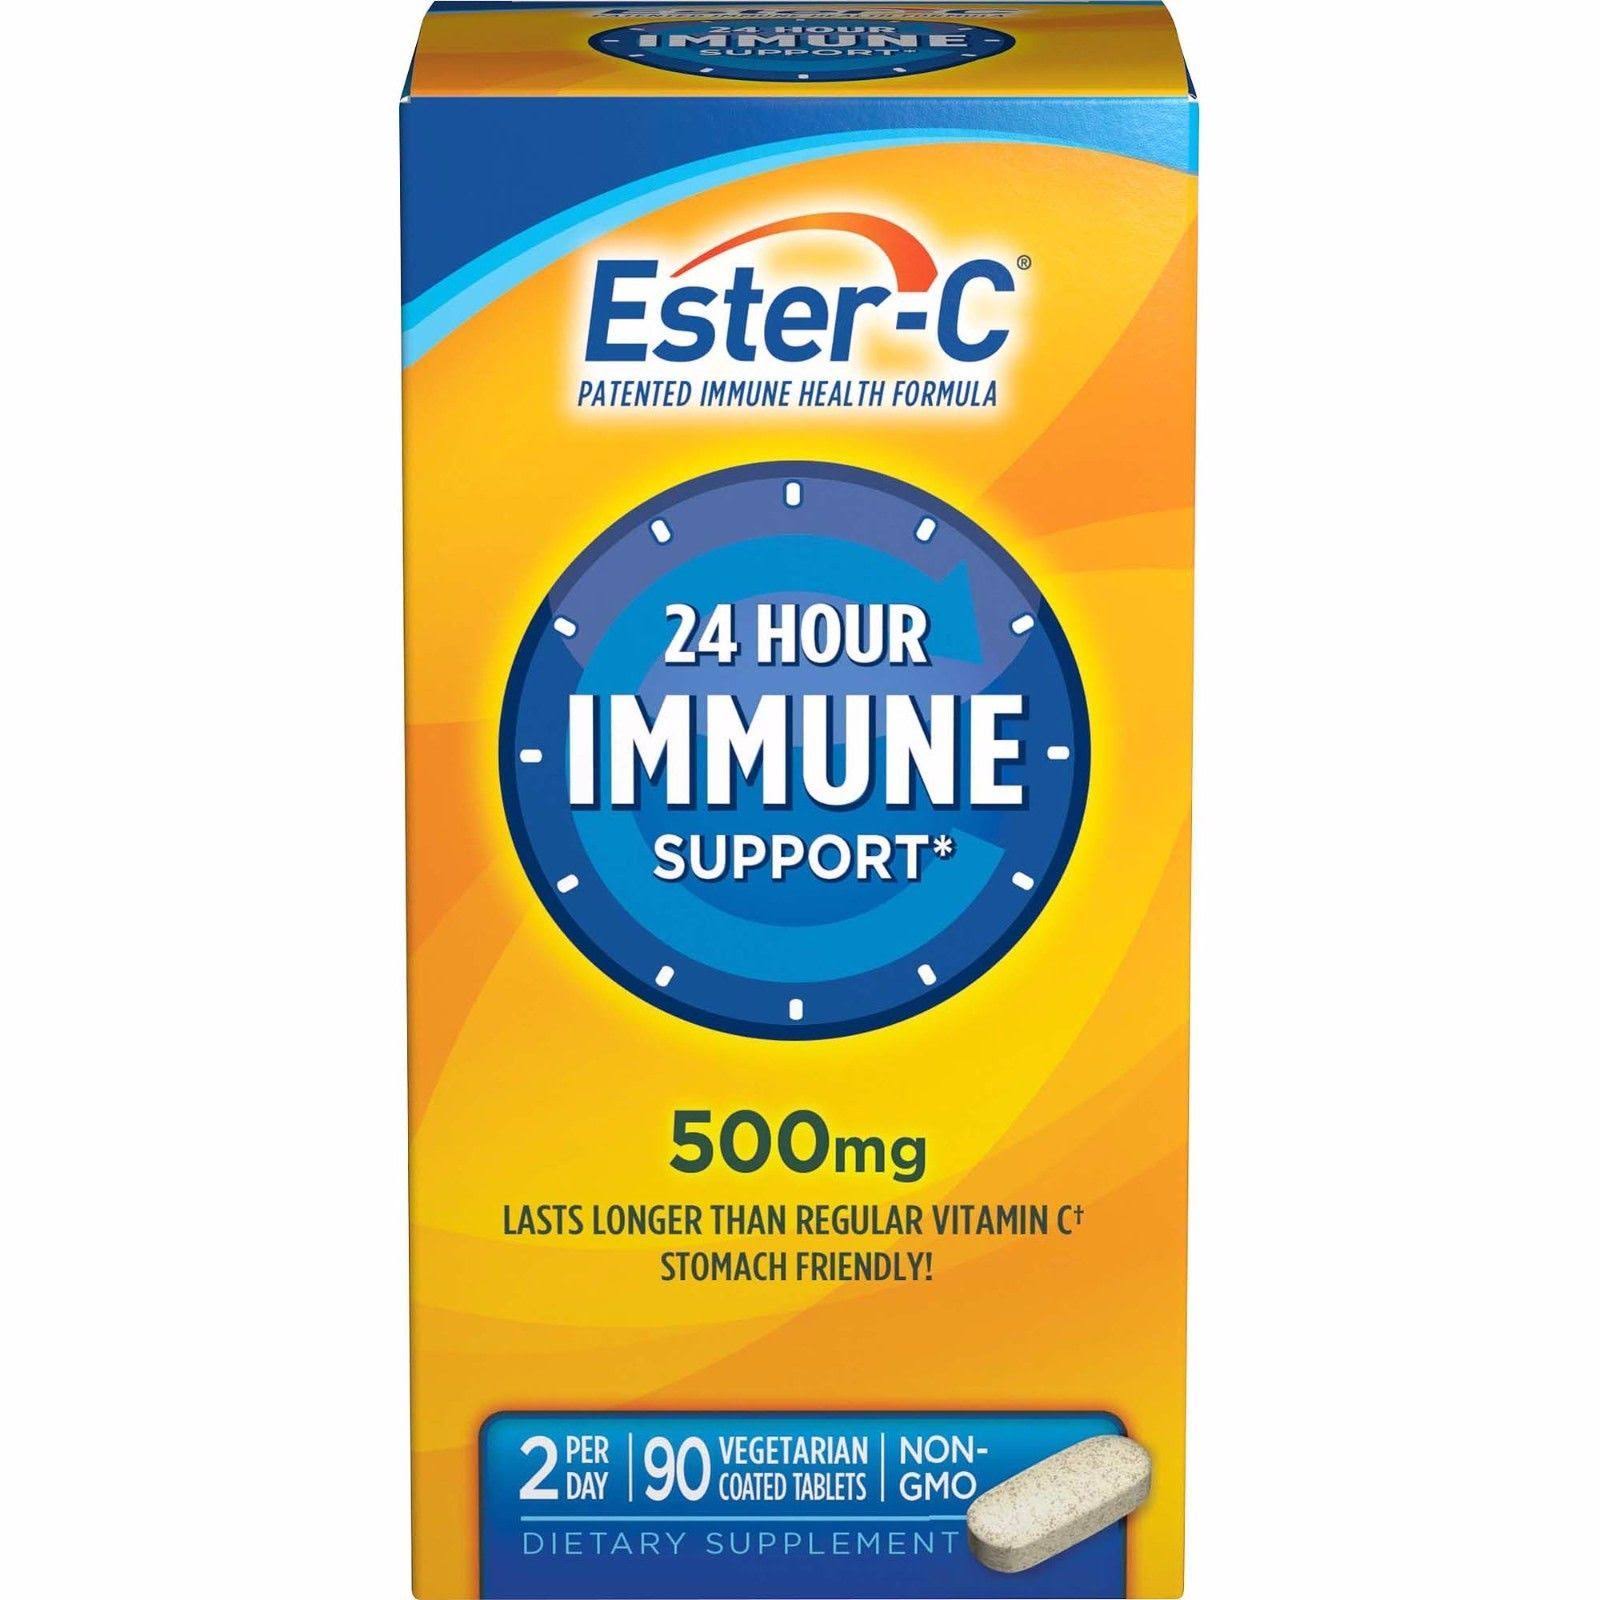 Ester C Better Vitamin C 24 Hour Immune Support Coated Tablet Supplement - 500mg, 90ct